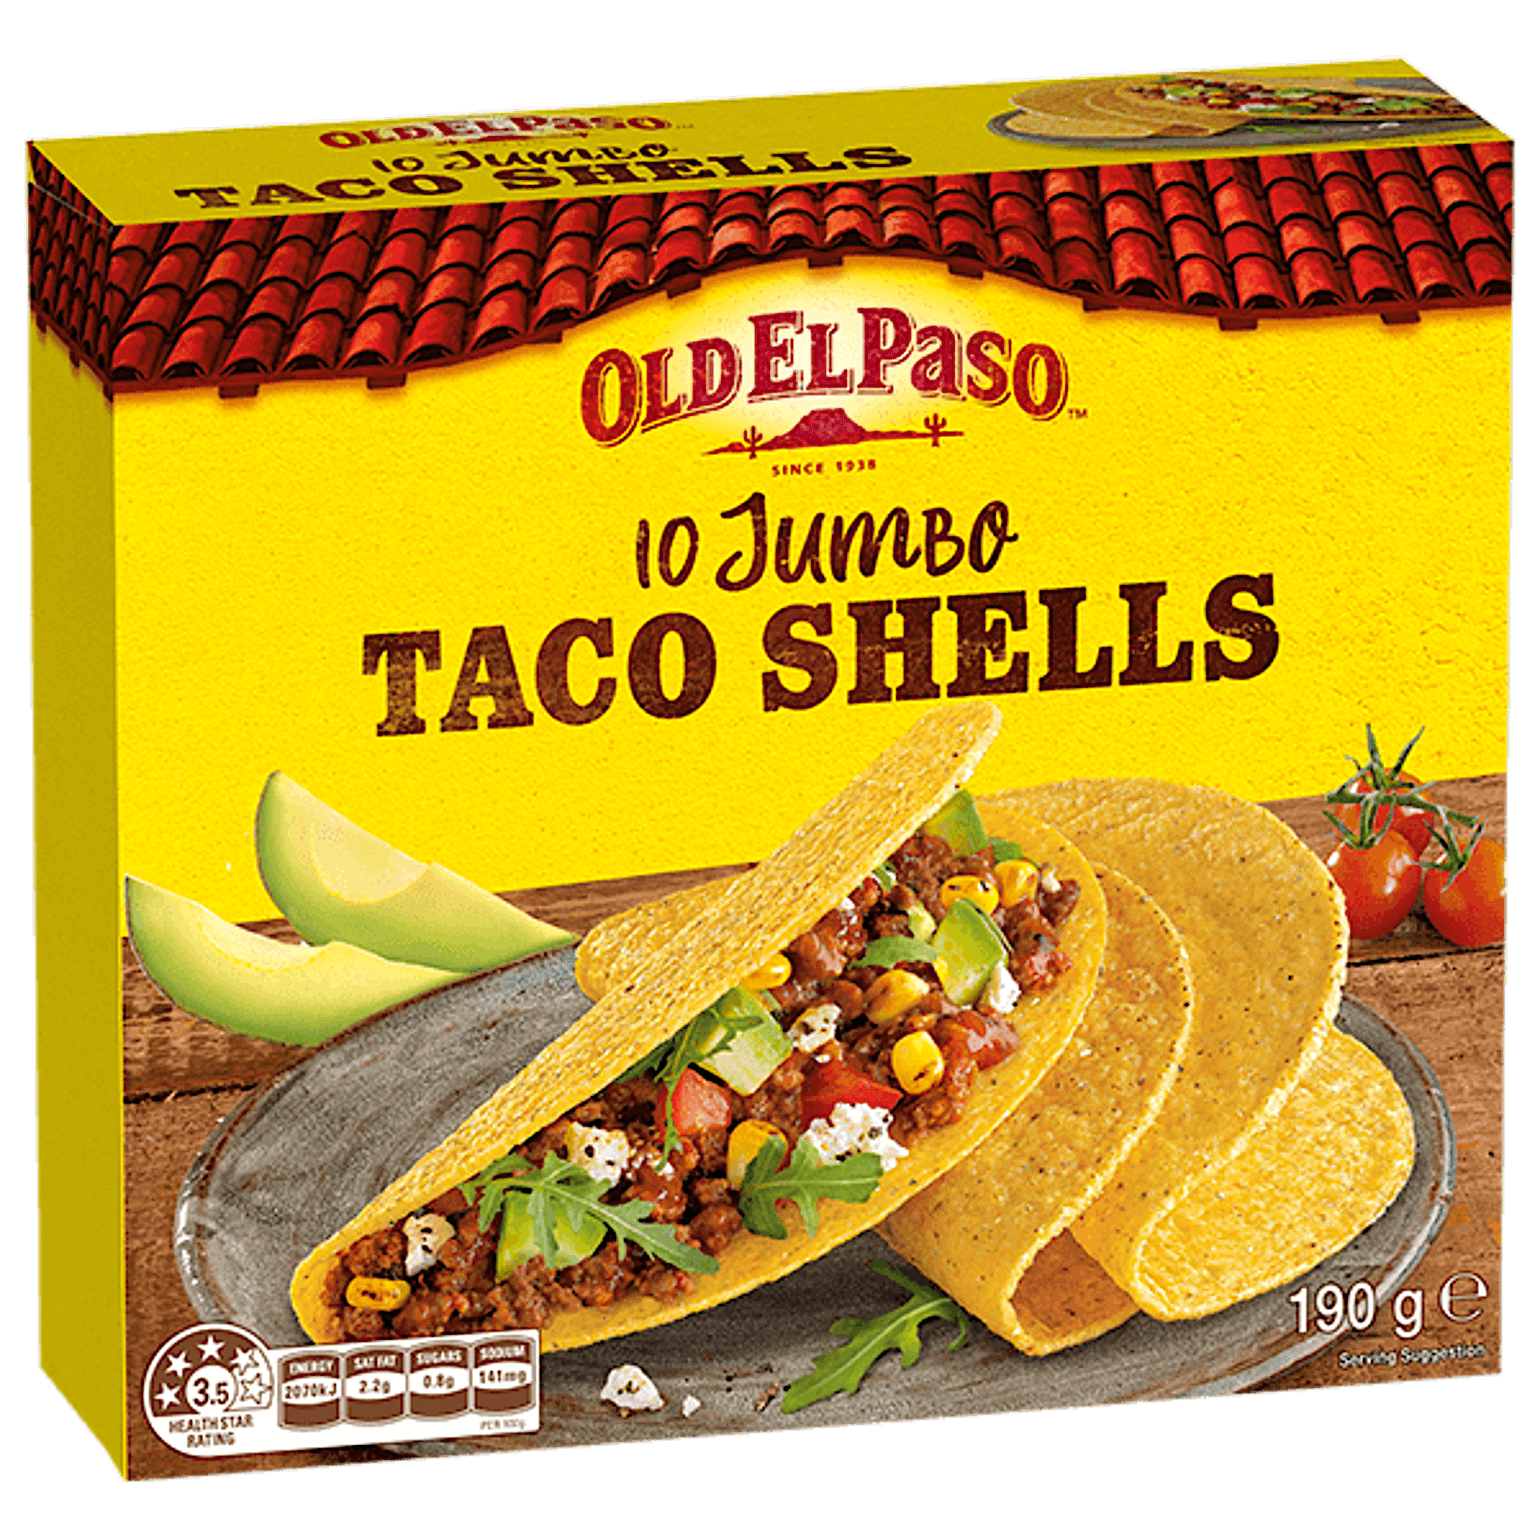 a pack of Old El Paso's 10 jumbo taco shells (190g)